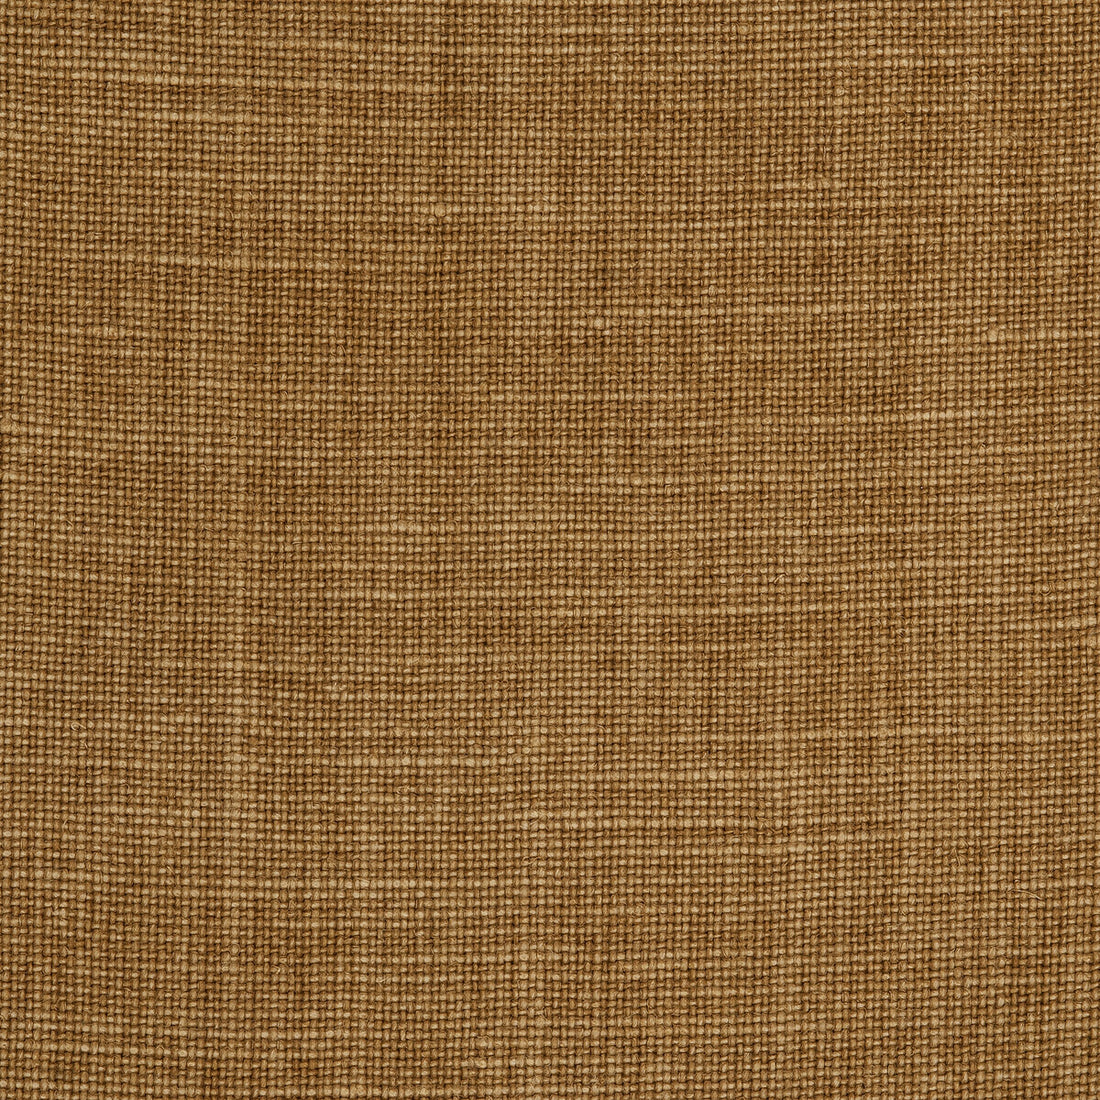 Weathered Linen fabric in ochre color - pattern BF10962.840.0 - by G P &amp; J Baker in the Baker House Linens collection